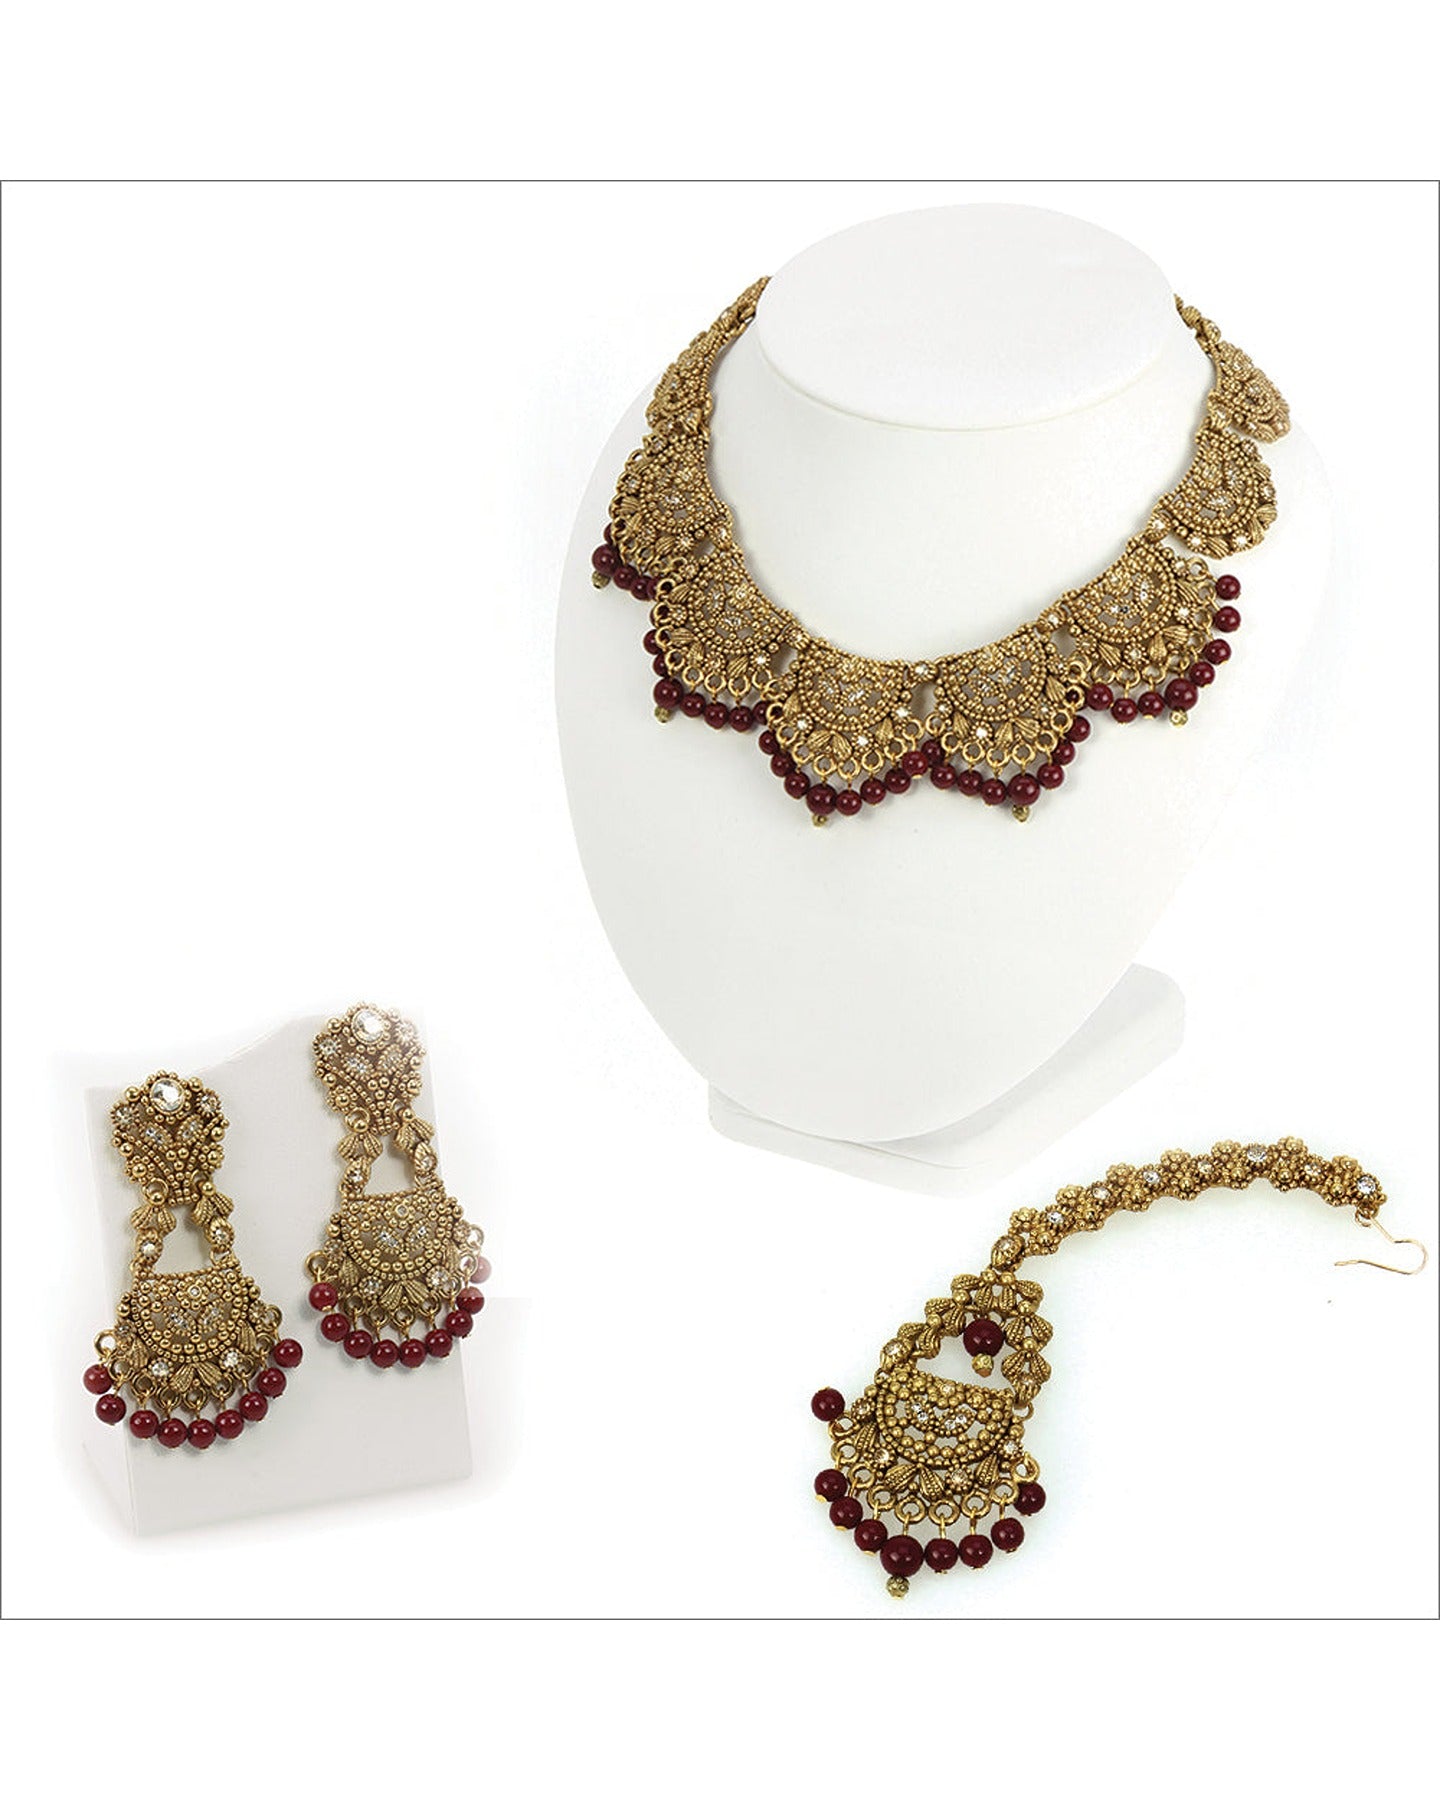 Antique Gold Jewelry with Crystal Golden Shadow and Dark Red Bead Accents